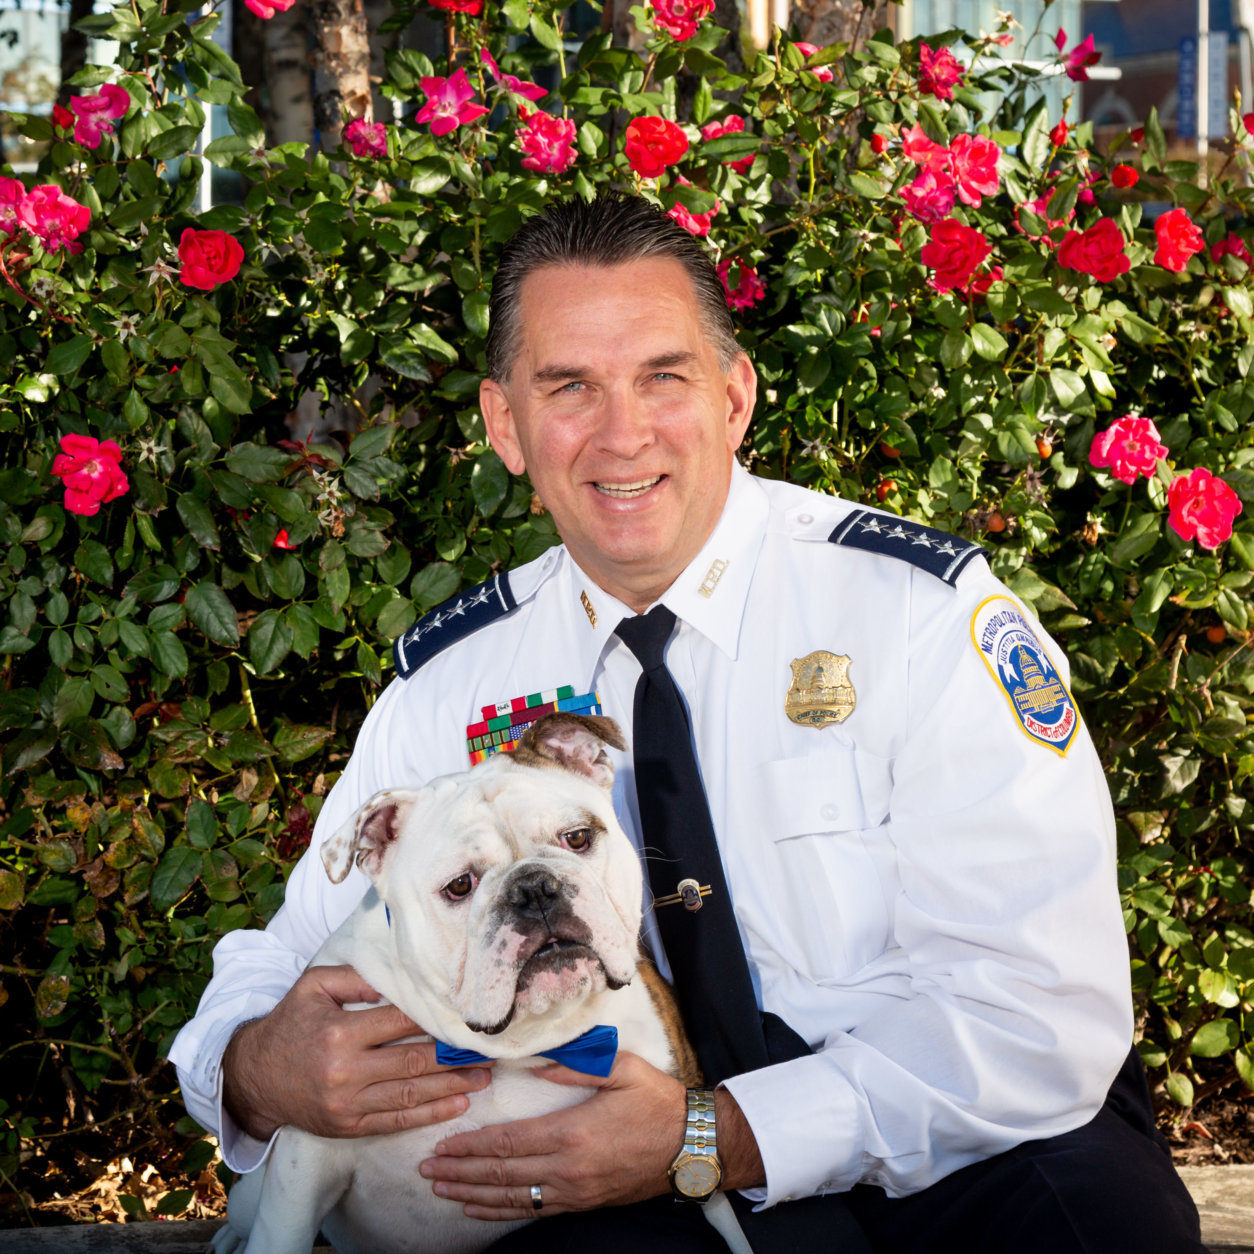 D.C. police Chief Peter Newsham patrols the sidewalks with his dog Harry. (Courtesy Humane Rescue Alliance)